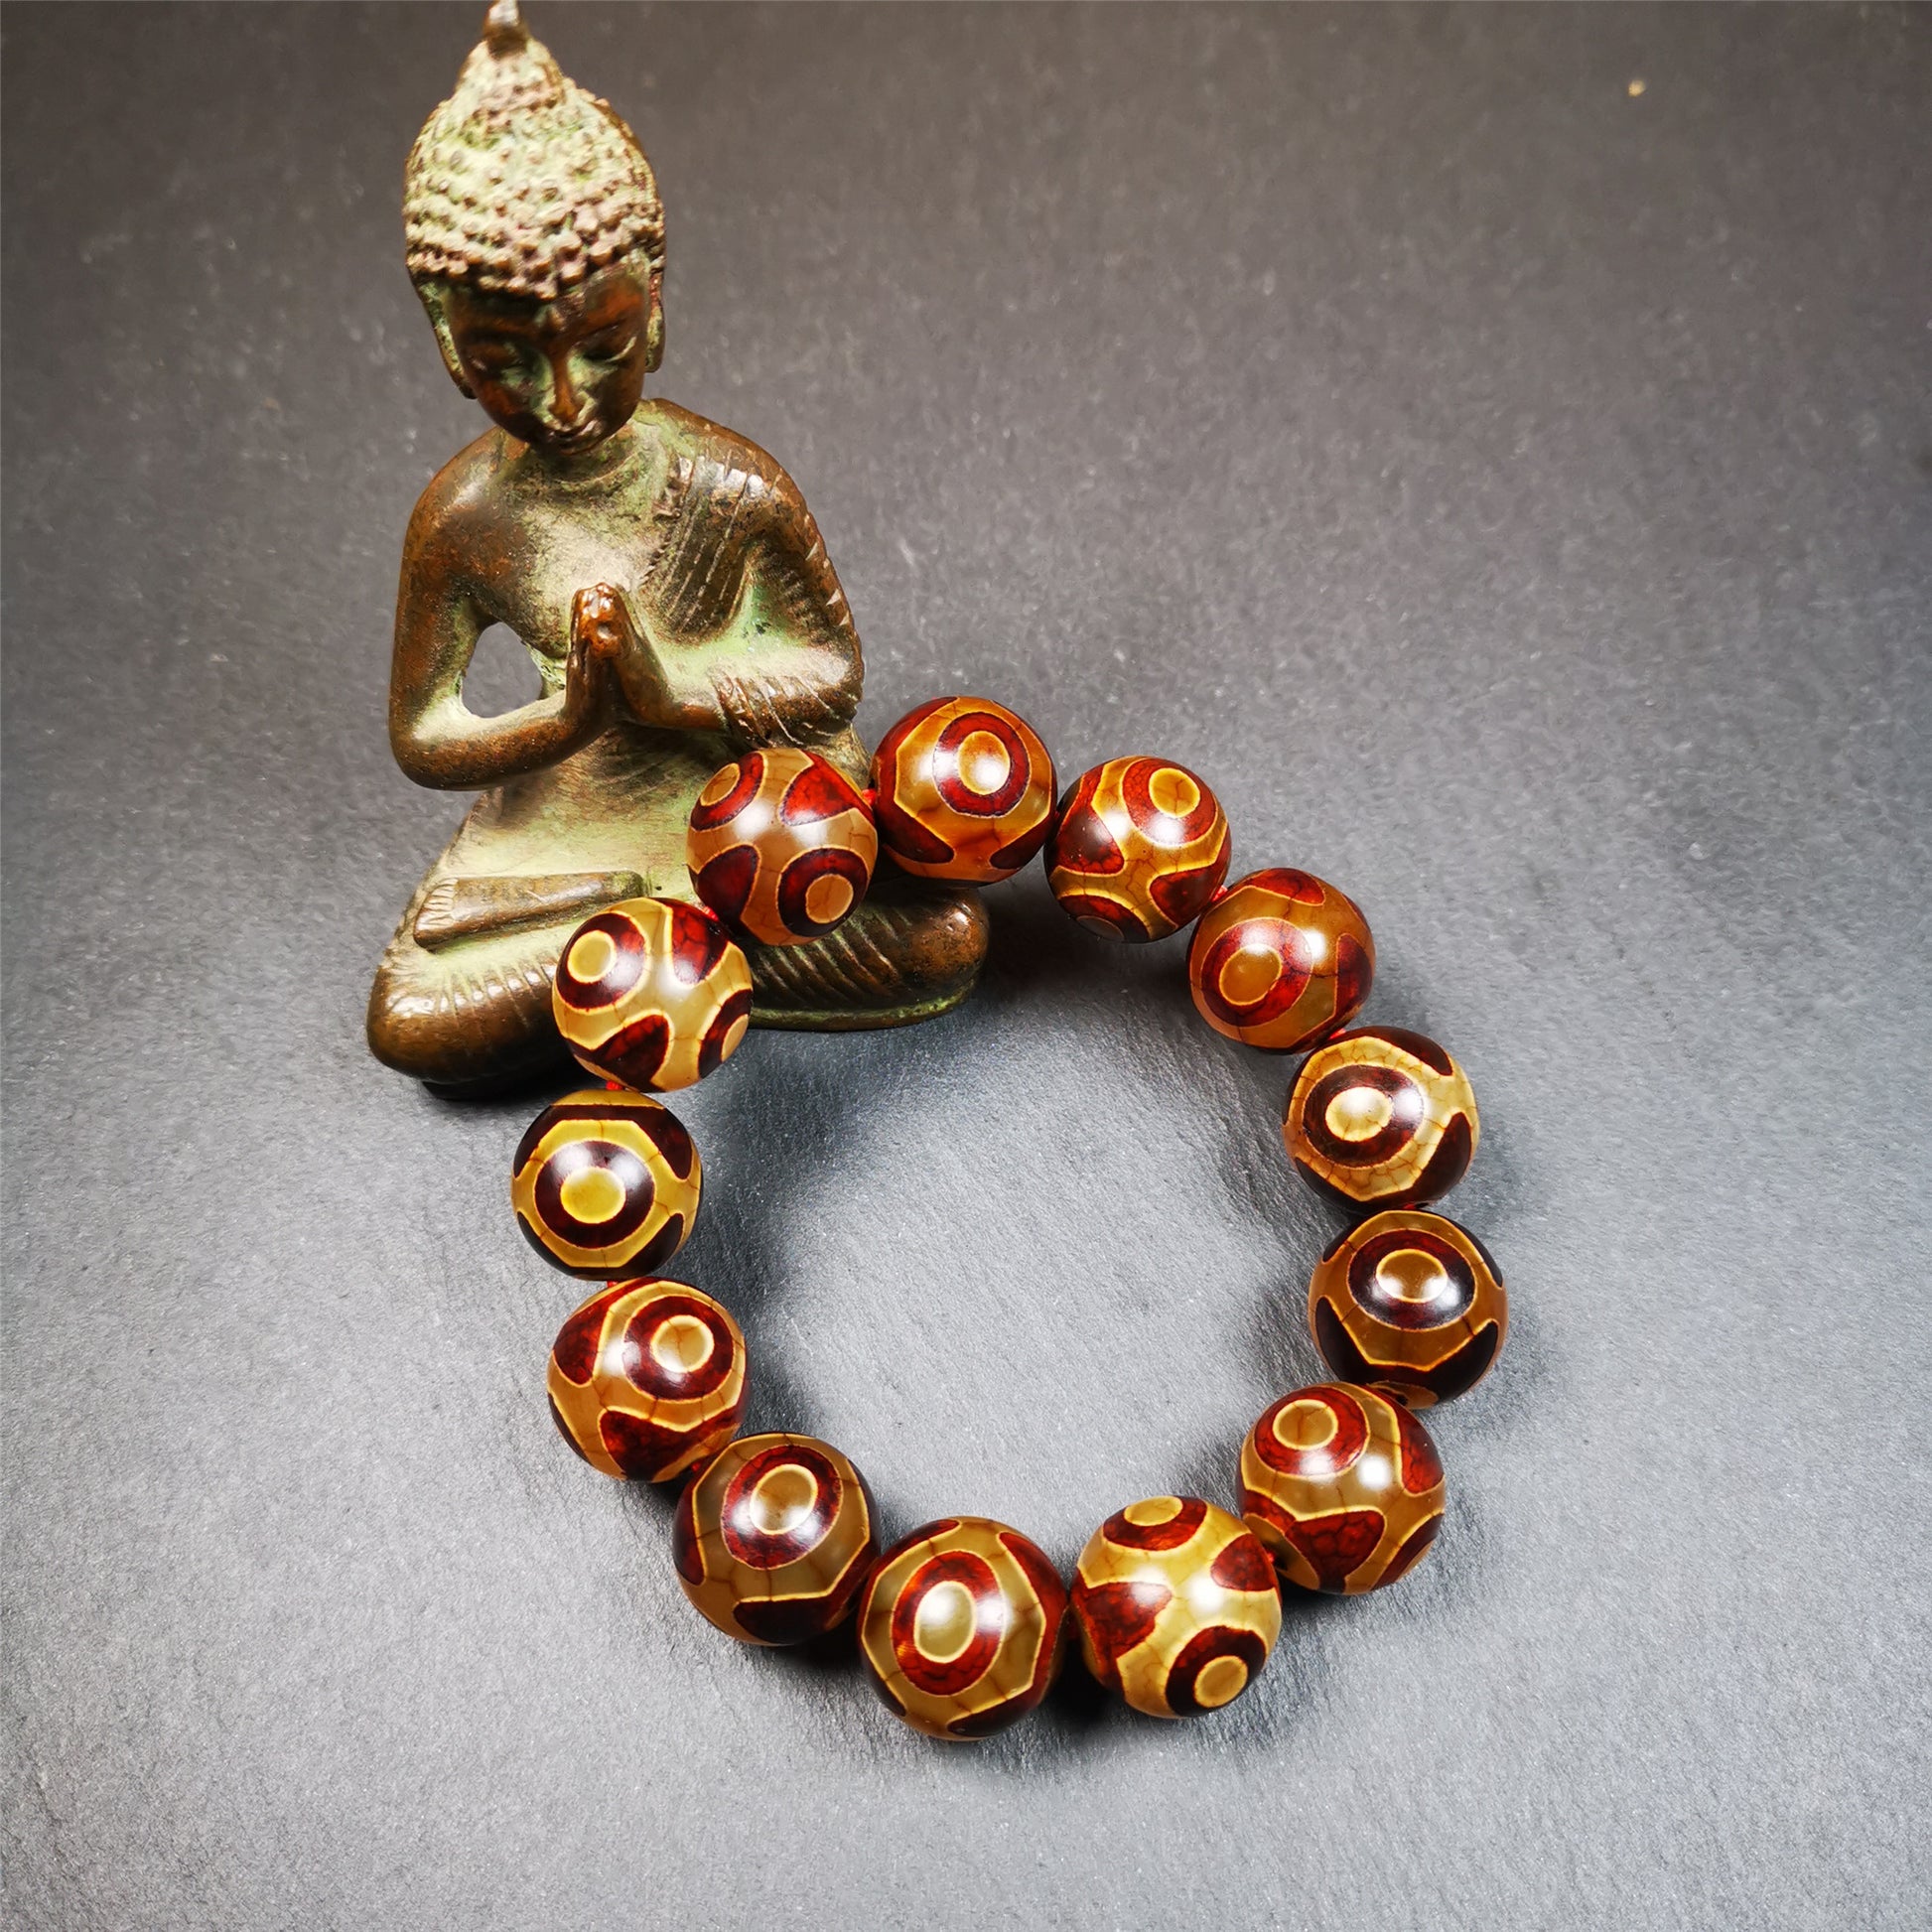  This 3 eyes bracelet was hand-woven by Tibetans,It's made of 3 eyes round dzi beads,brown color,diameter is 0.63", the circumference of bracelet is 7.5".  It can be worn not only as a fashionable accessory but also holds cultural and religious significance.